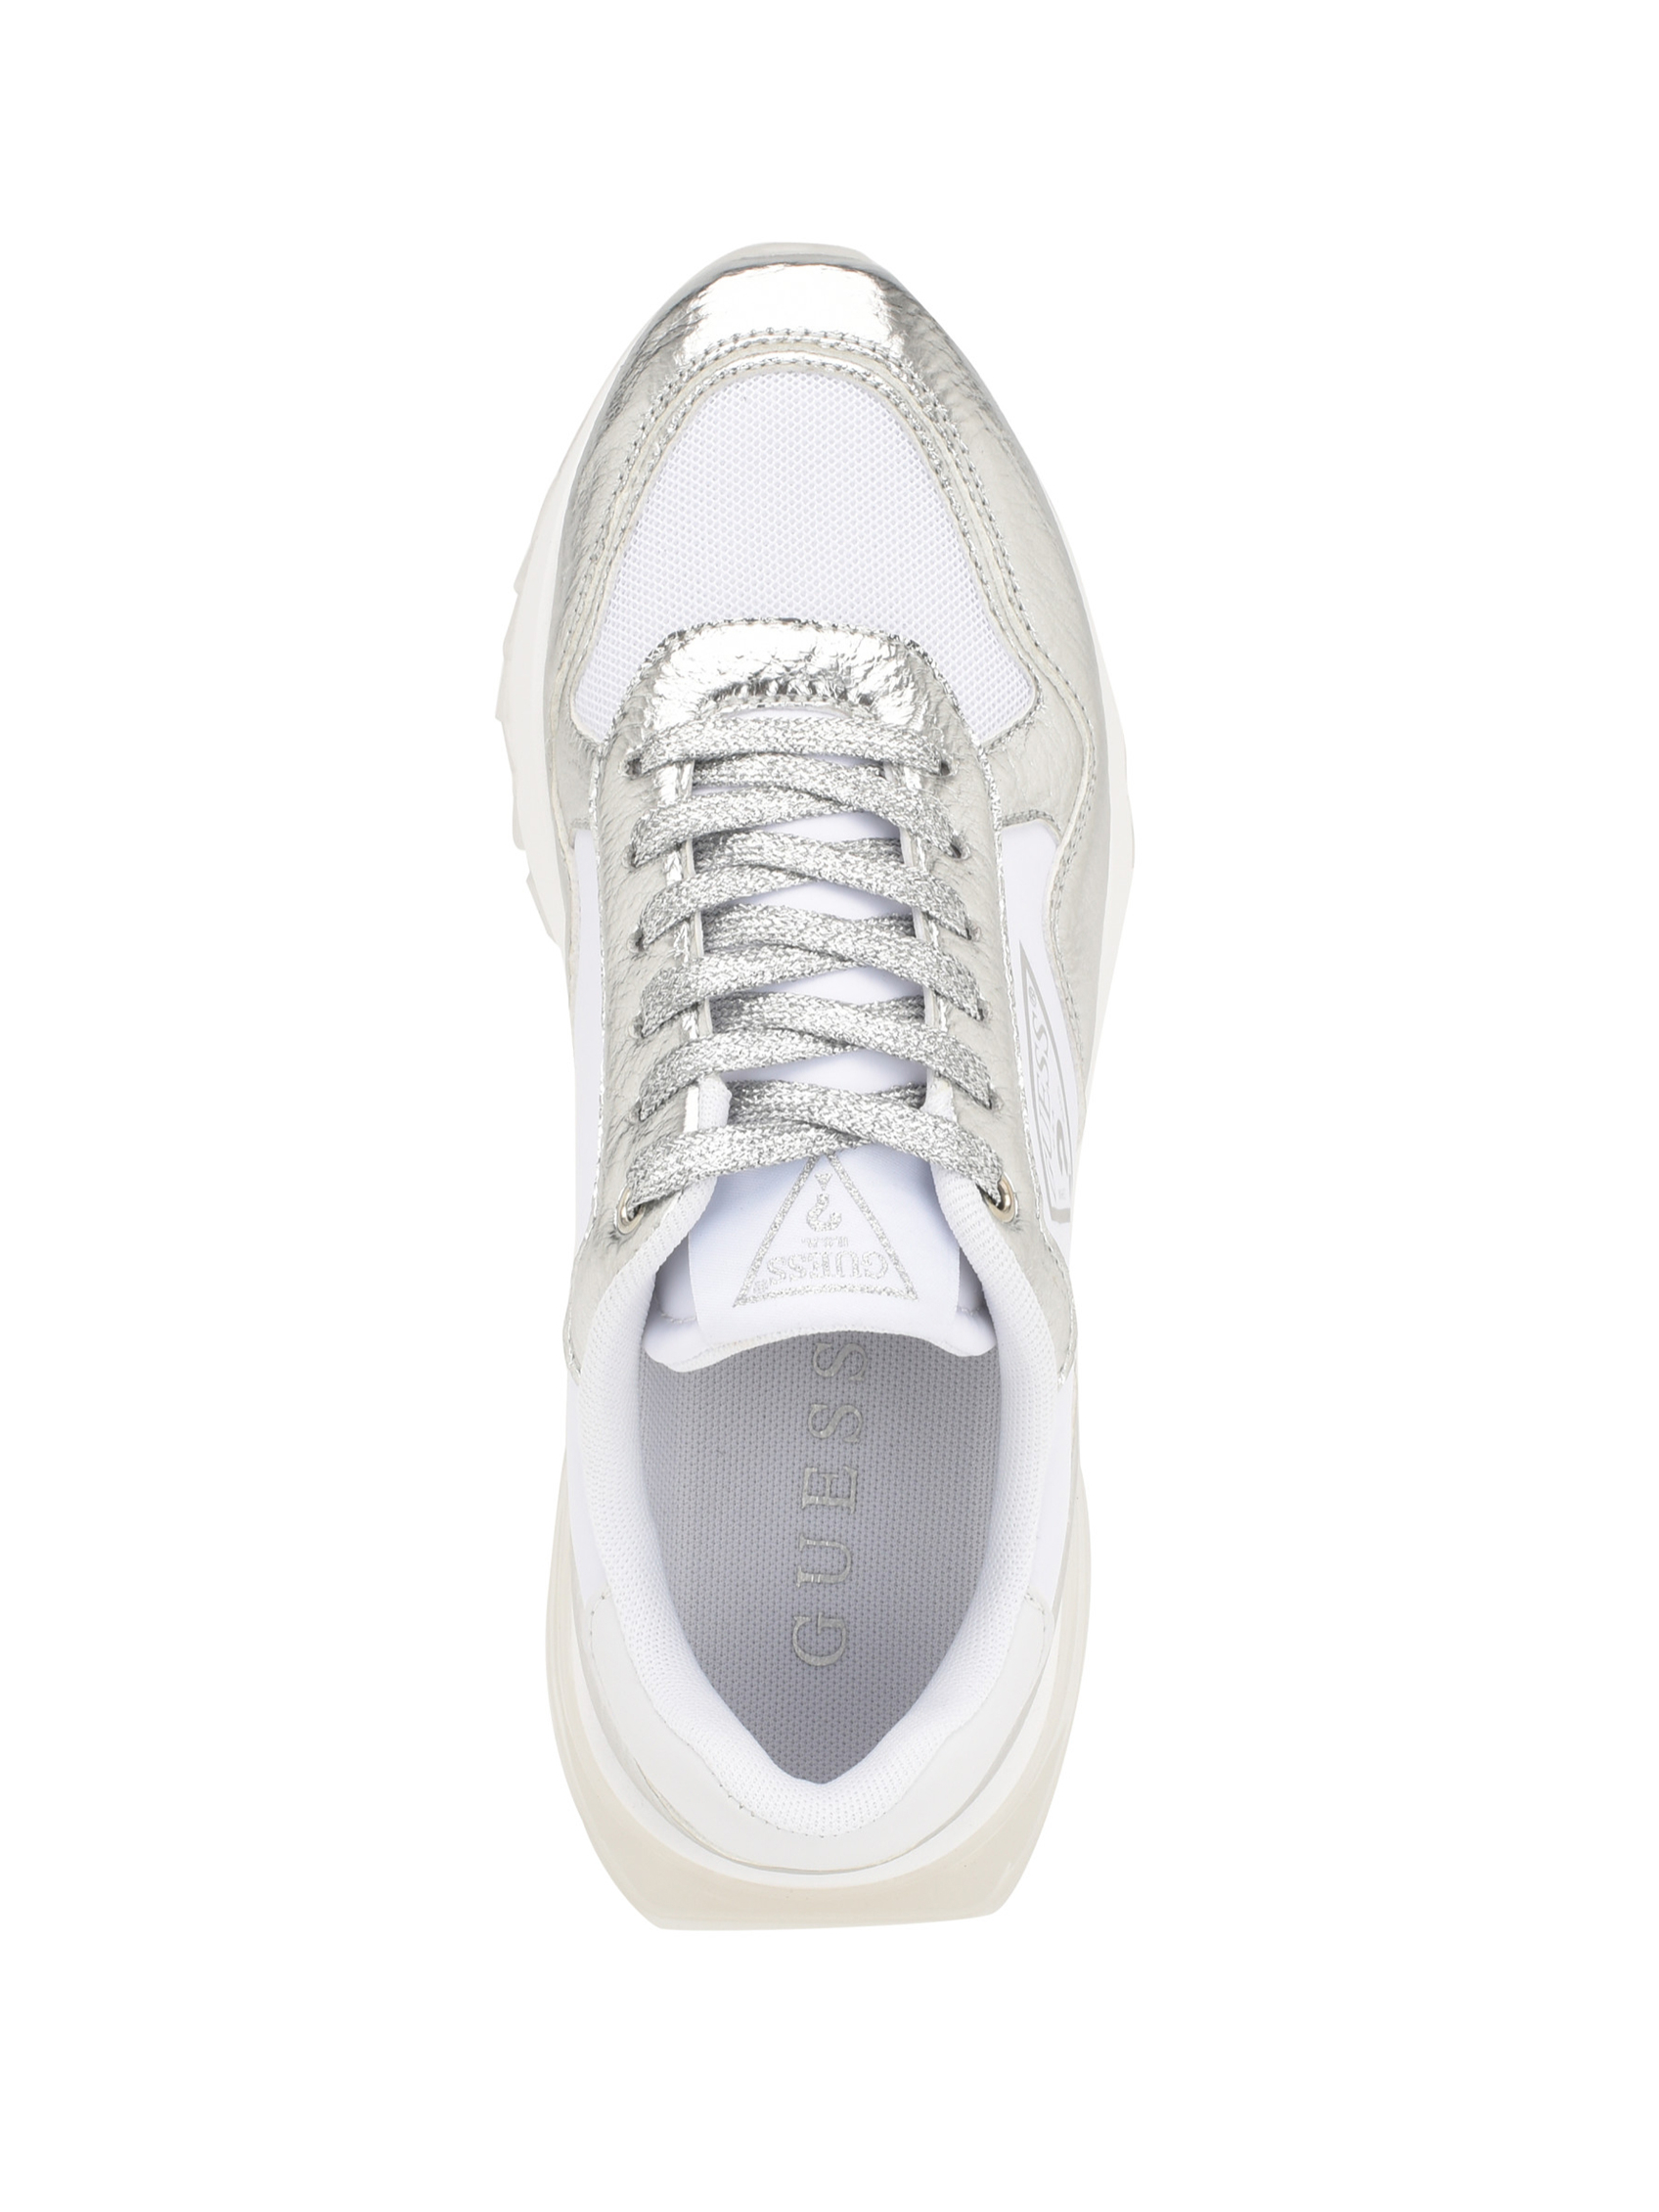 MELANY SIDE LOGO SNEAKERS | Guess Philippines